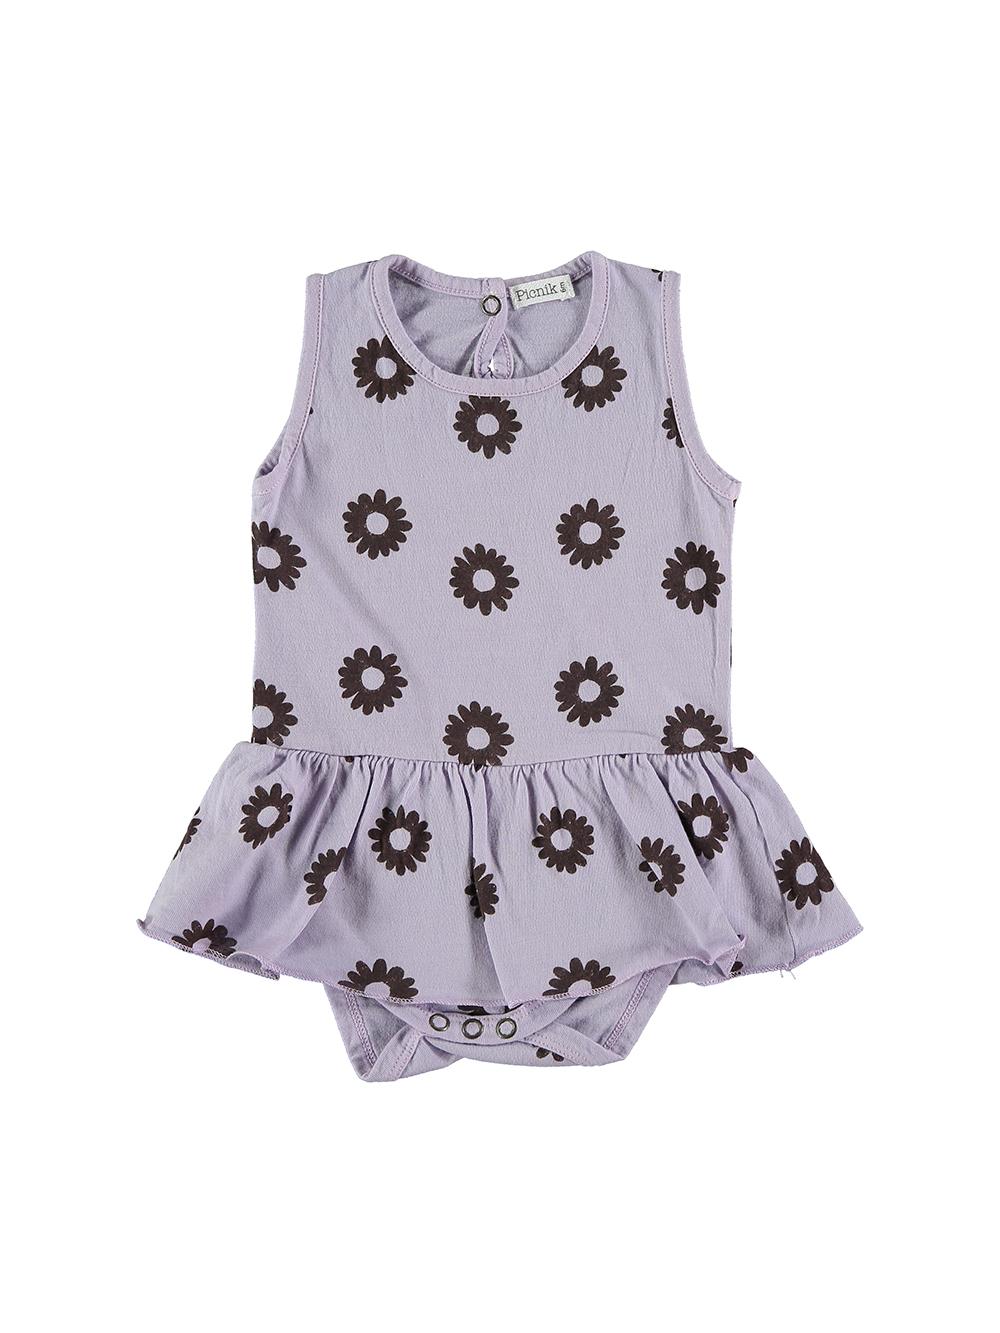 LILAC FLOWER PRINTED BODYSUIT WITH STRAPS AND Ruffle